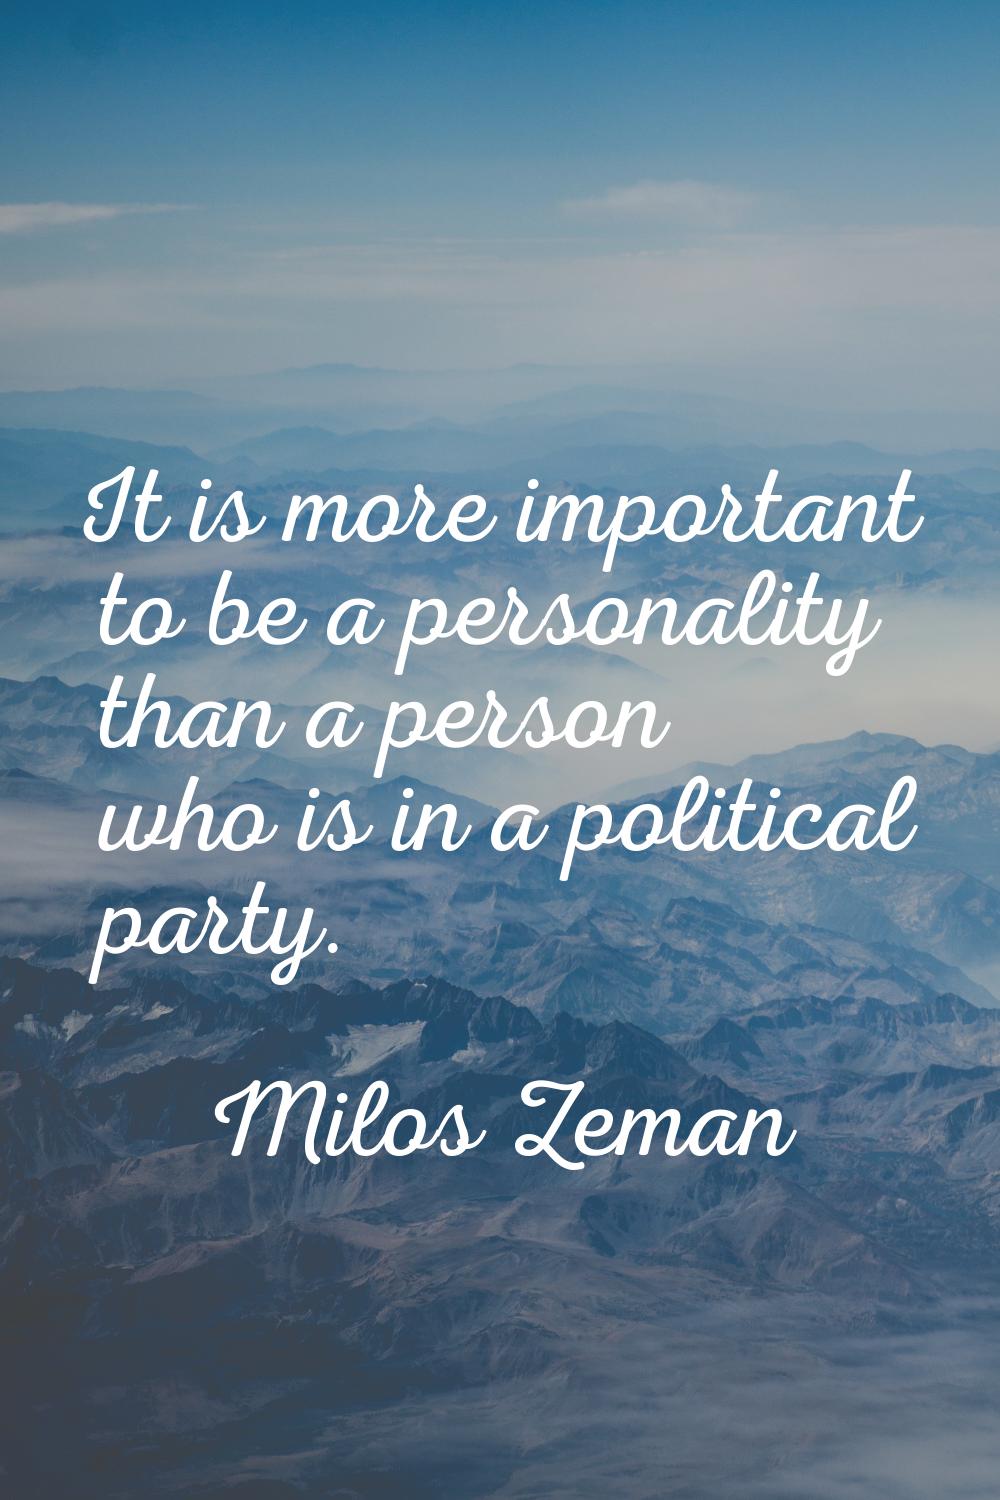 It is more important to be a personality than a person who is in a political party.